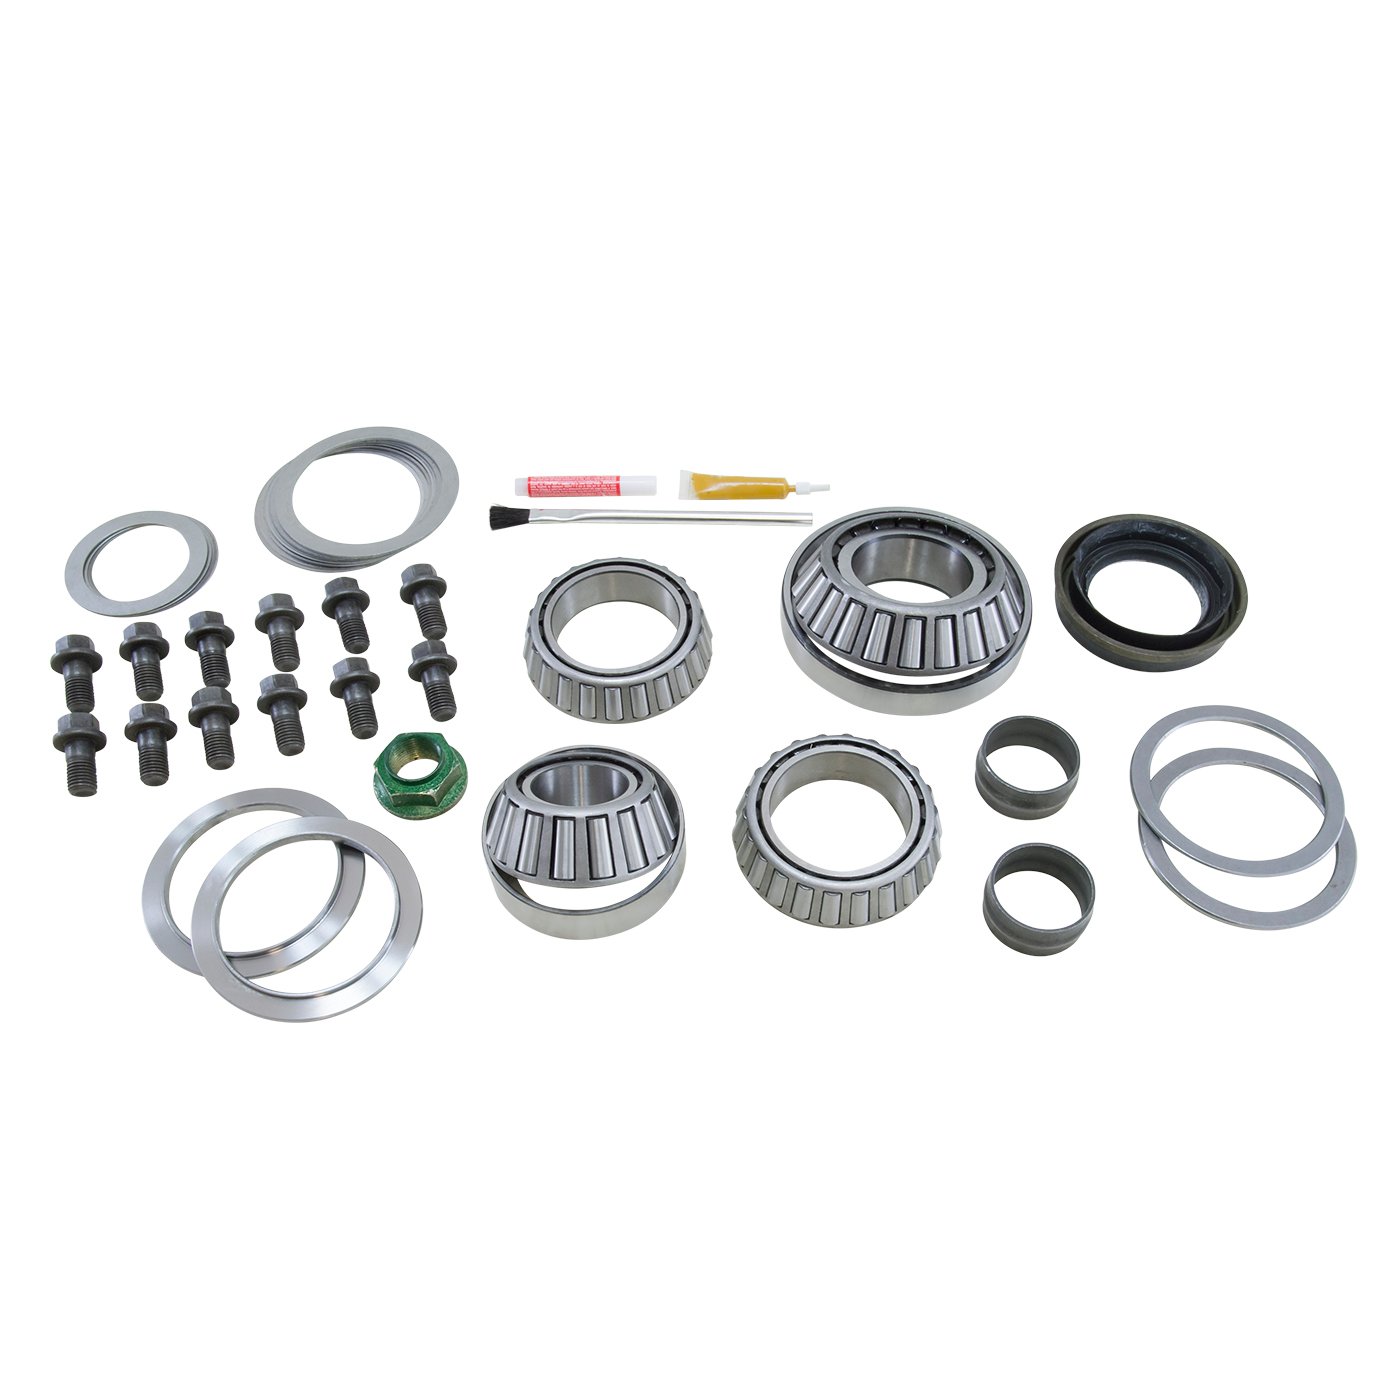 USA Standard ZK GM9.5-A Master Overhaul Kit, For The '79-'97 GM 9.5 in. Differential